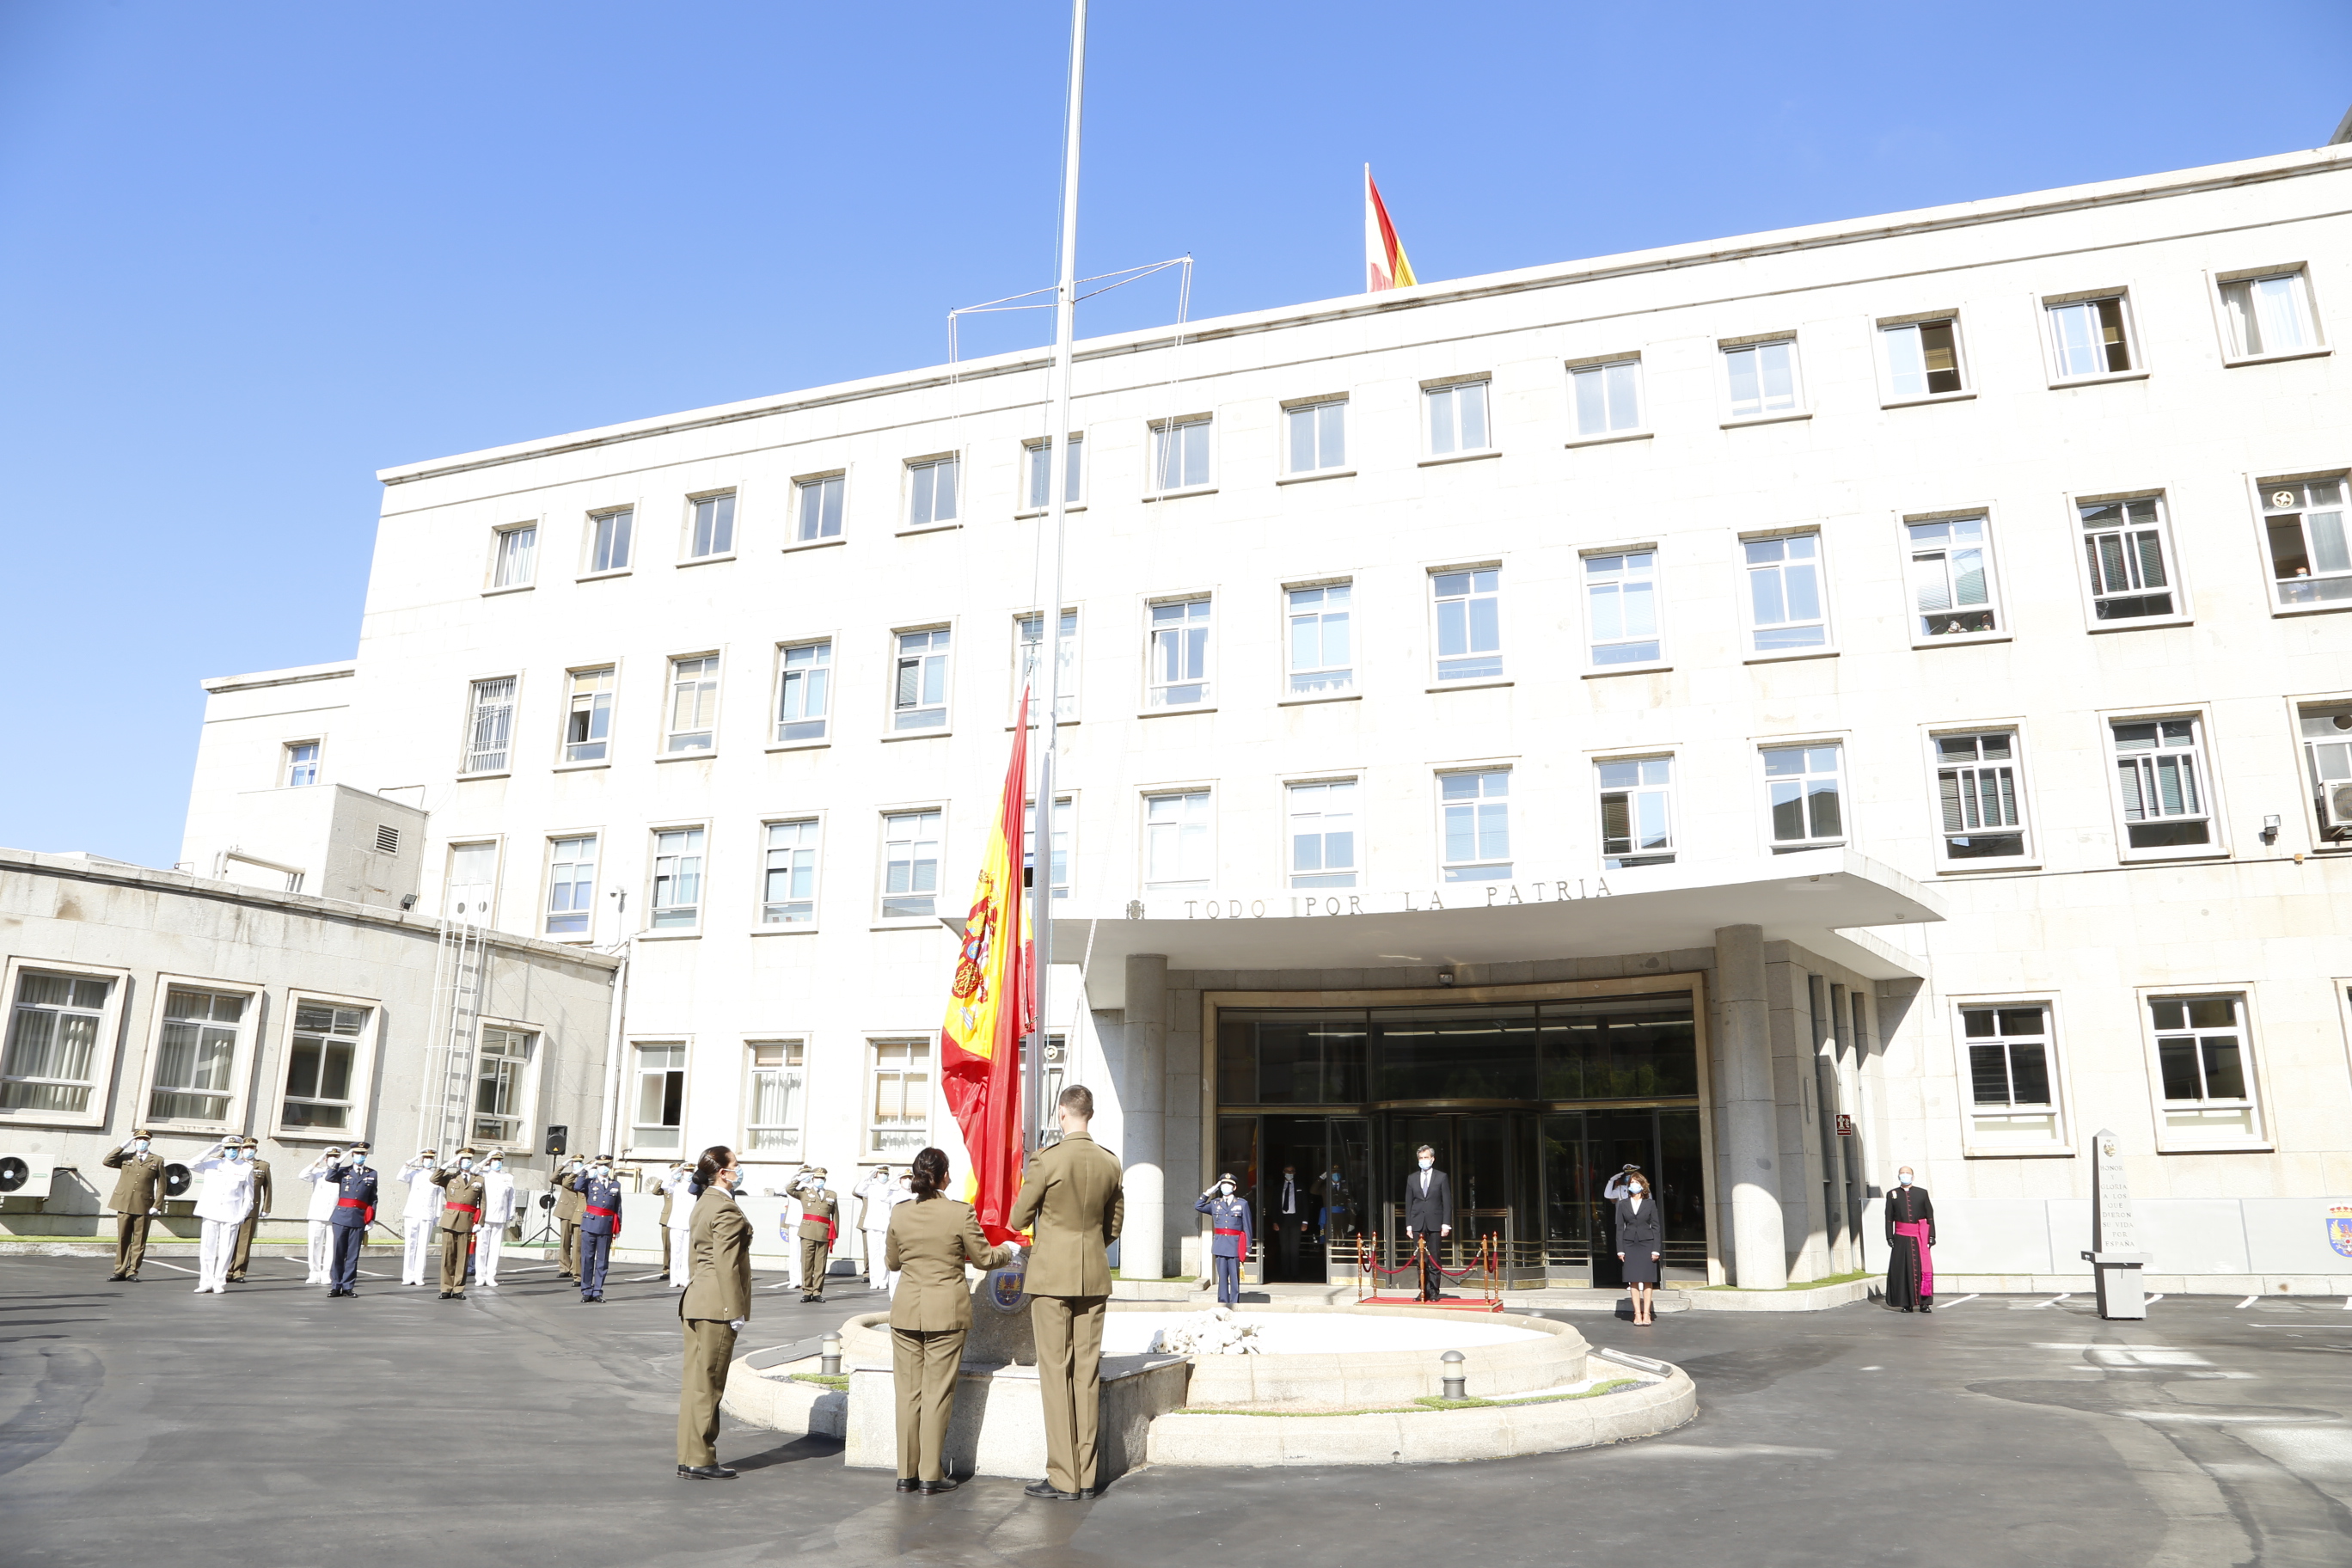 Solemn flag raising ceremony honoring the sixth Anniversary of the Proclamation of H.M. King Felipe VI